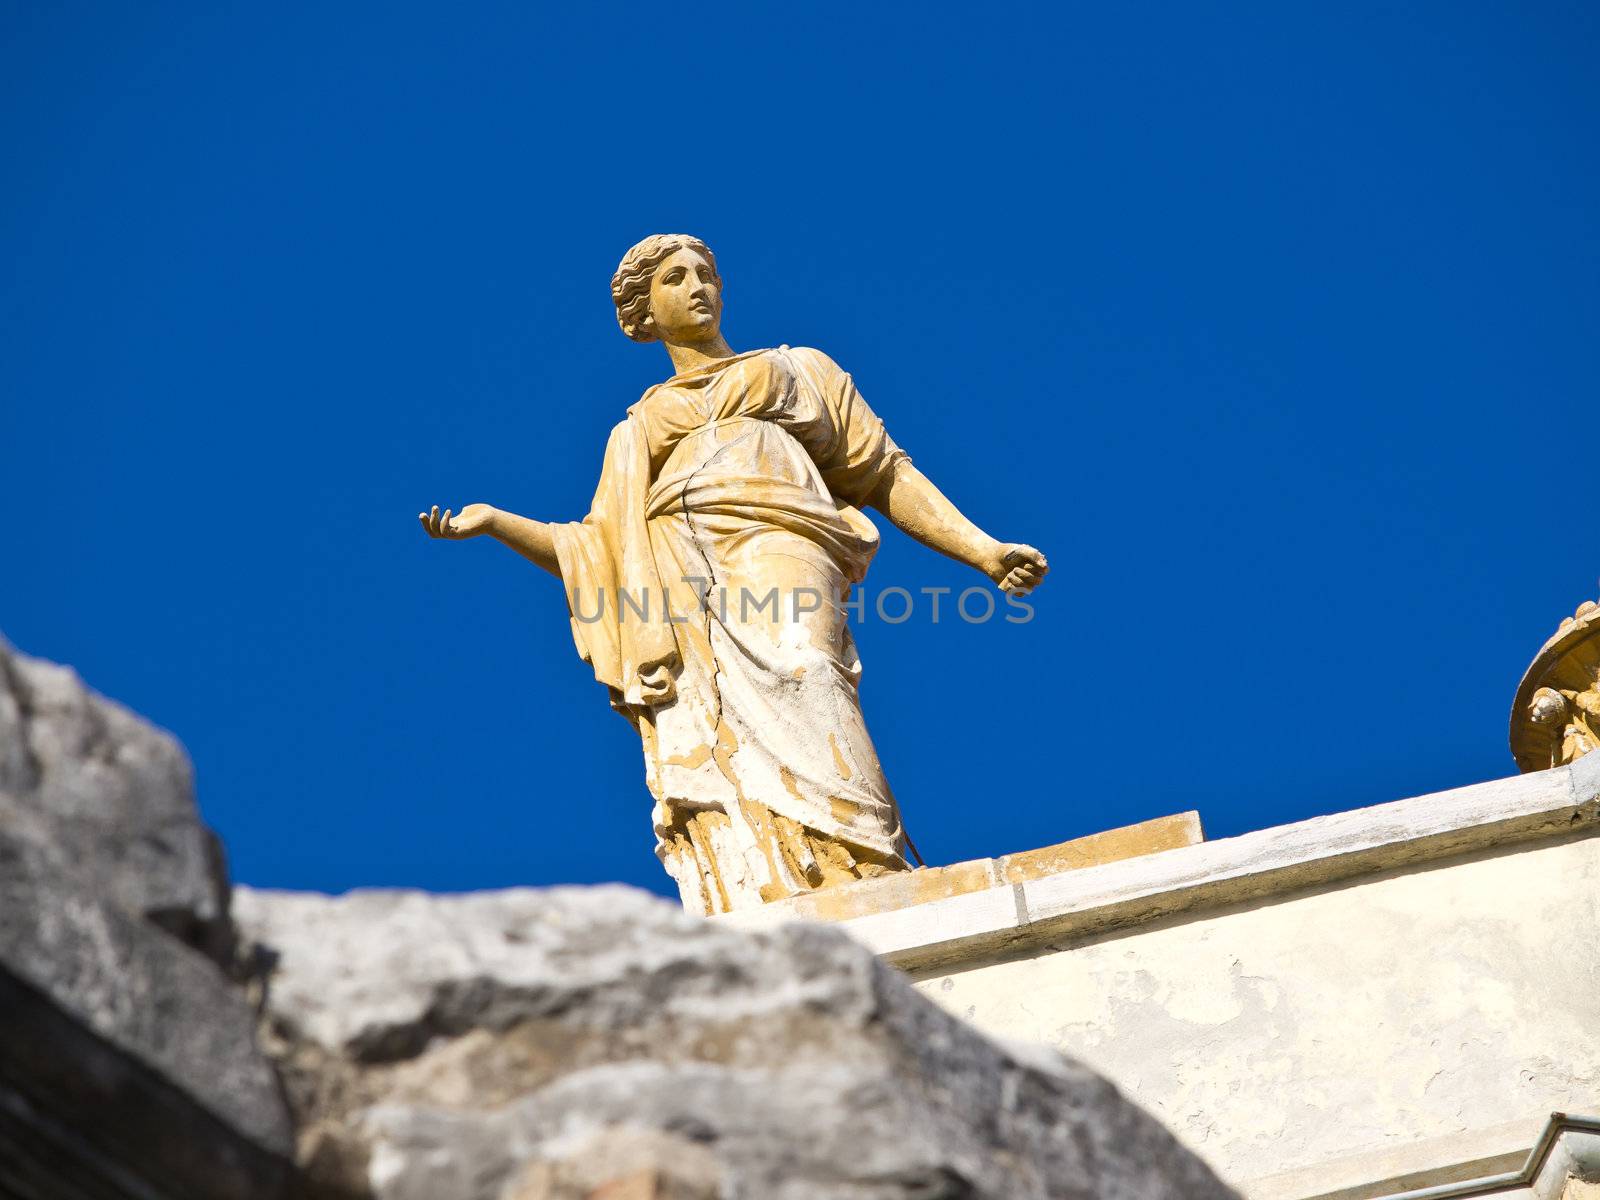 antic sculpture and the blue sky